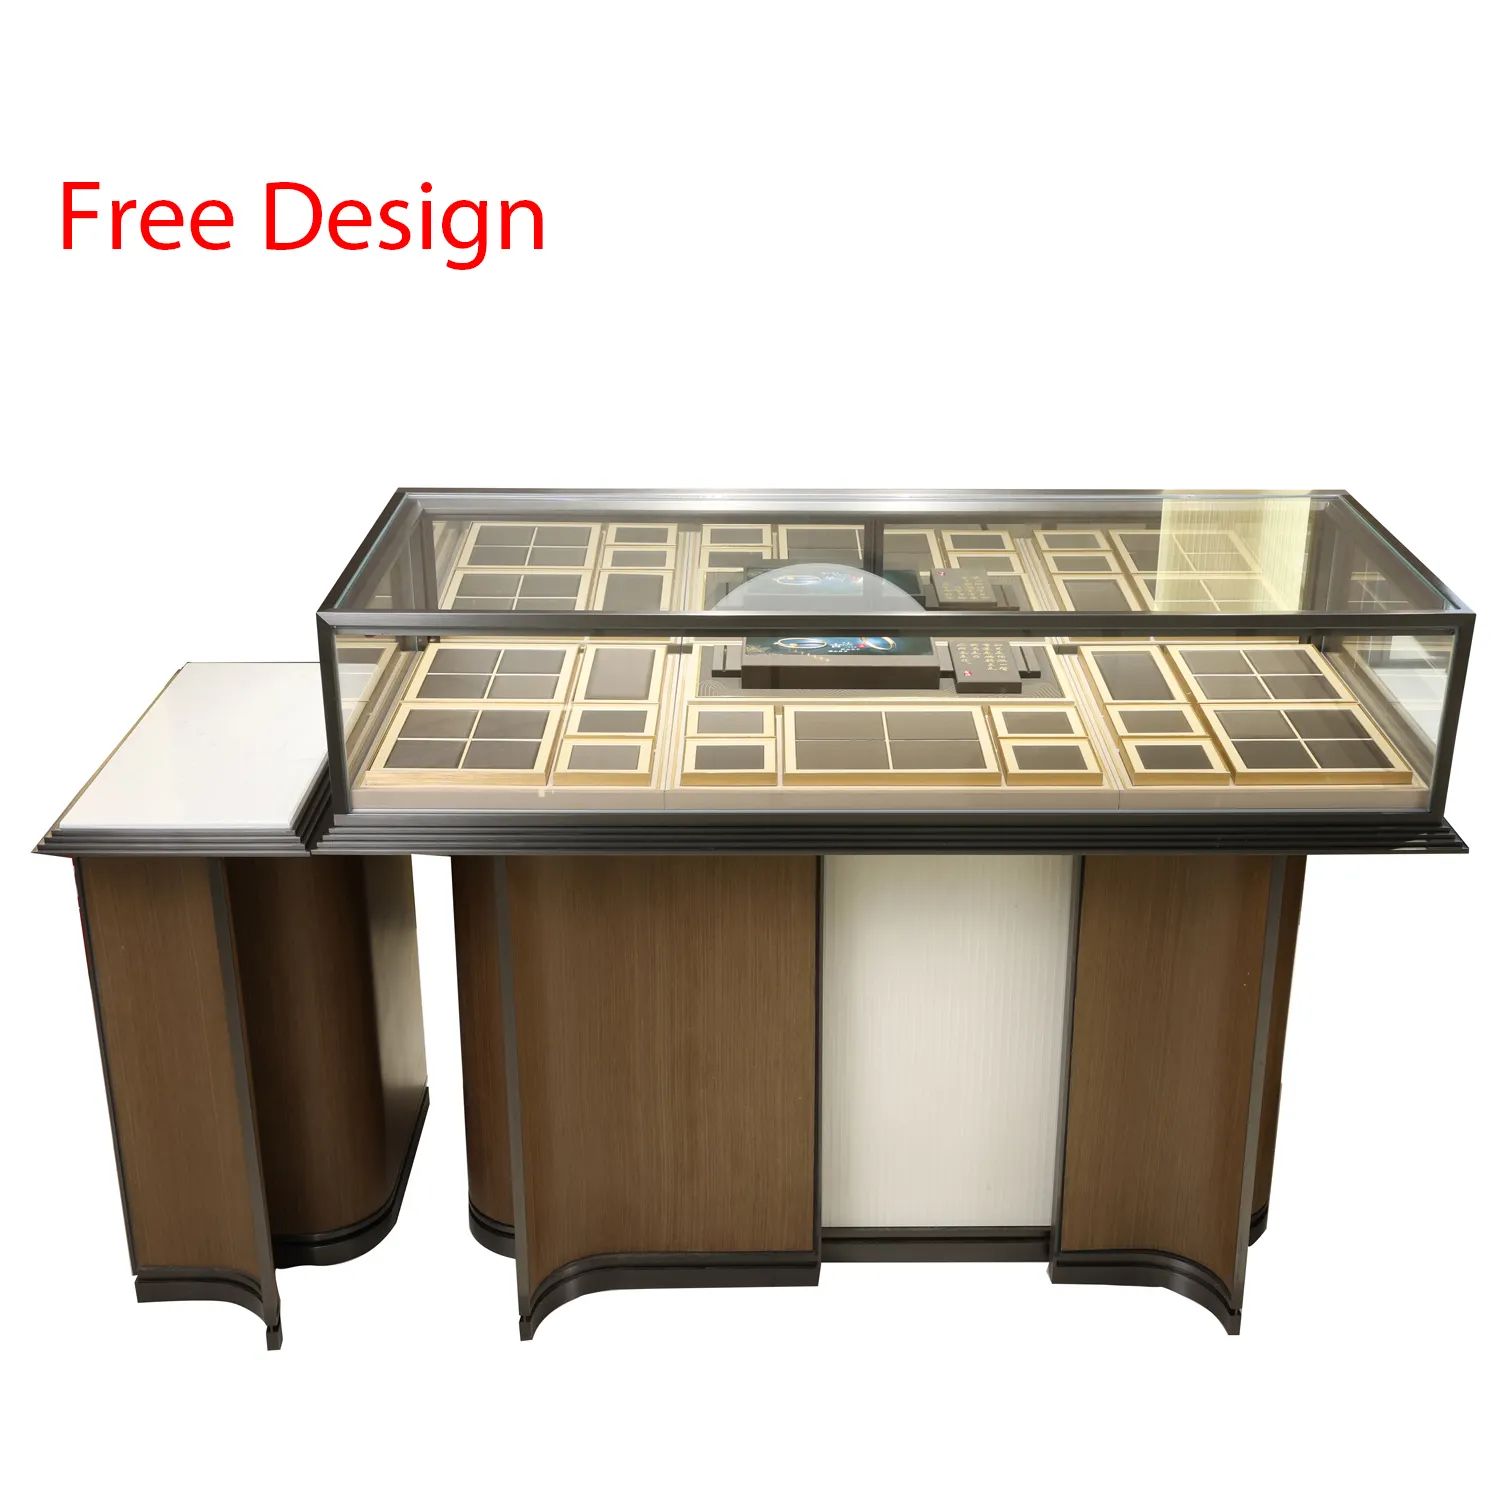 Wholesale Model New Fully Assembled Versatile Showroom Display Case Square Cabinet Streamline Jewelry Display Table Showcase